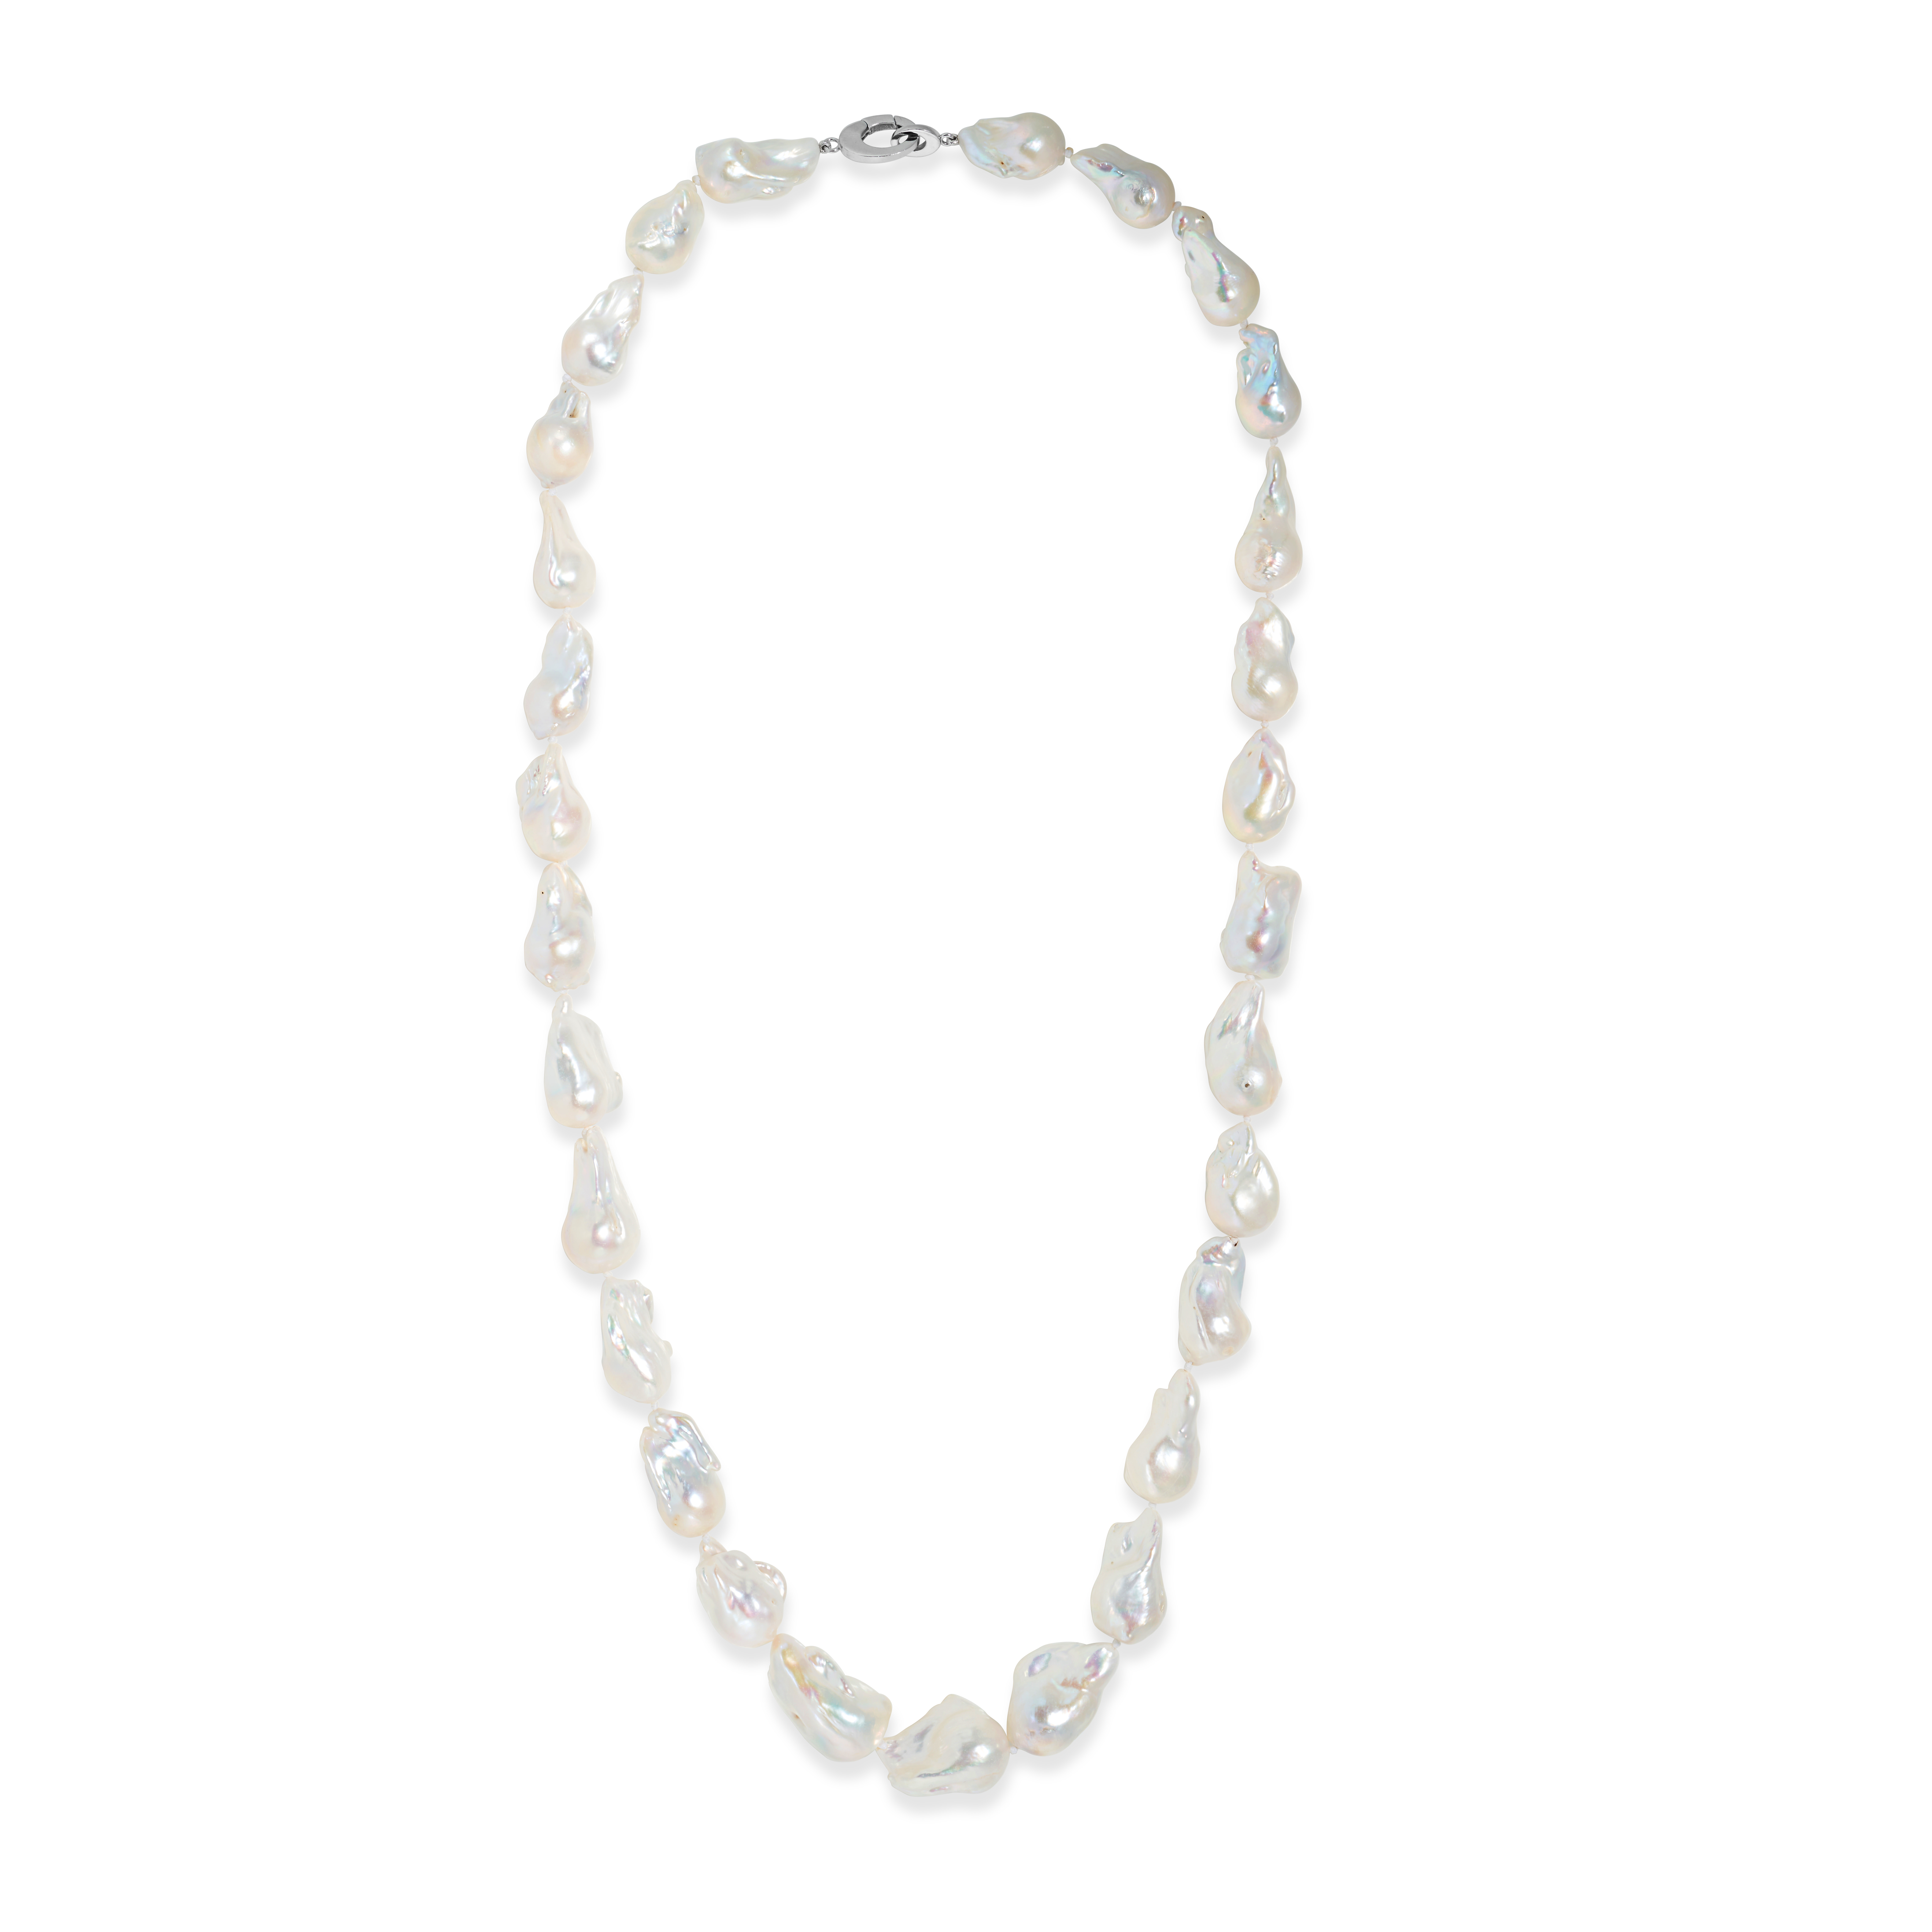 A BAROQUE PEARL NECKLACE in silver, comprising a row of baroque pearls, clasp stamped 925, 87.0cm...